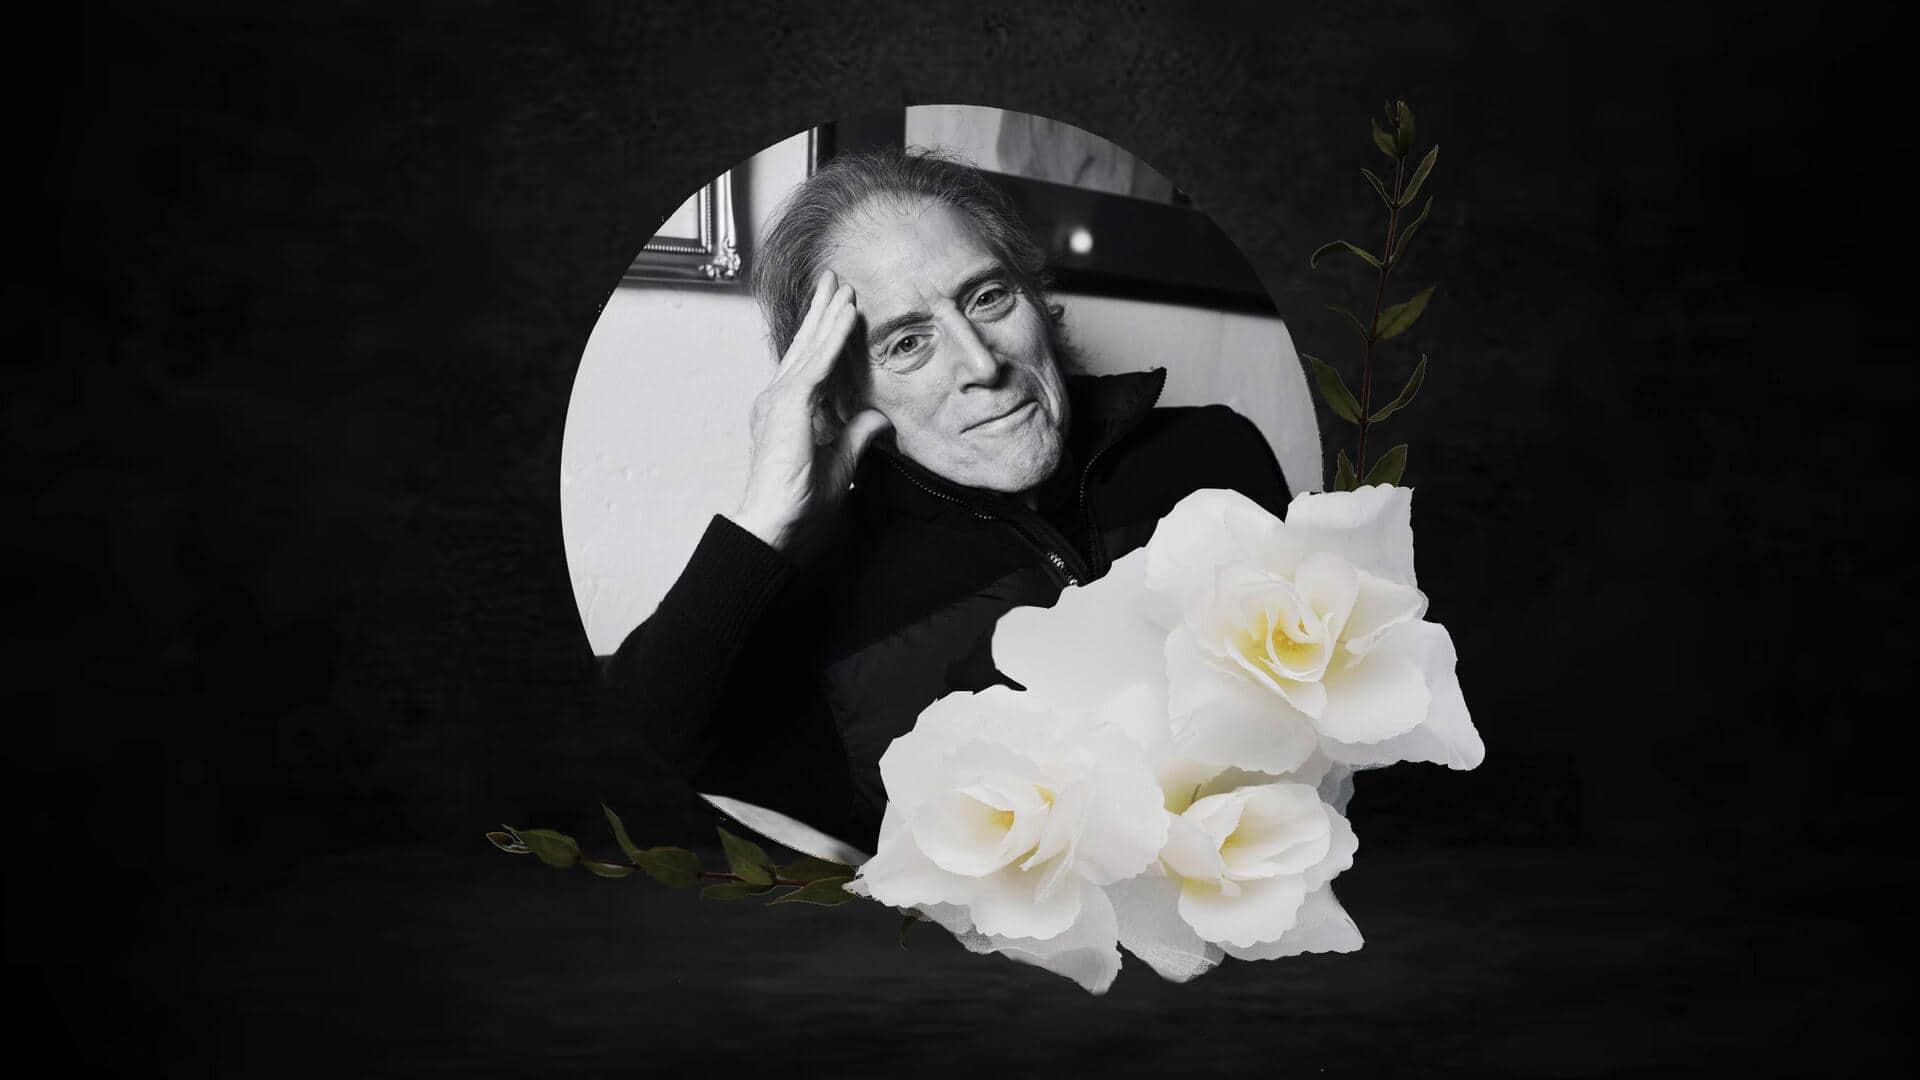 Celebrated works of late comedian-actor Richard Lewis